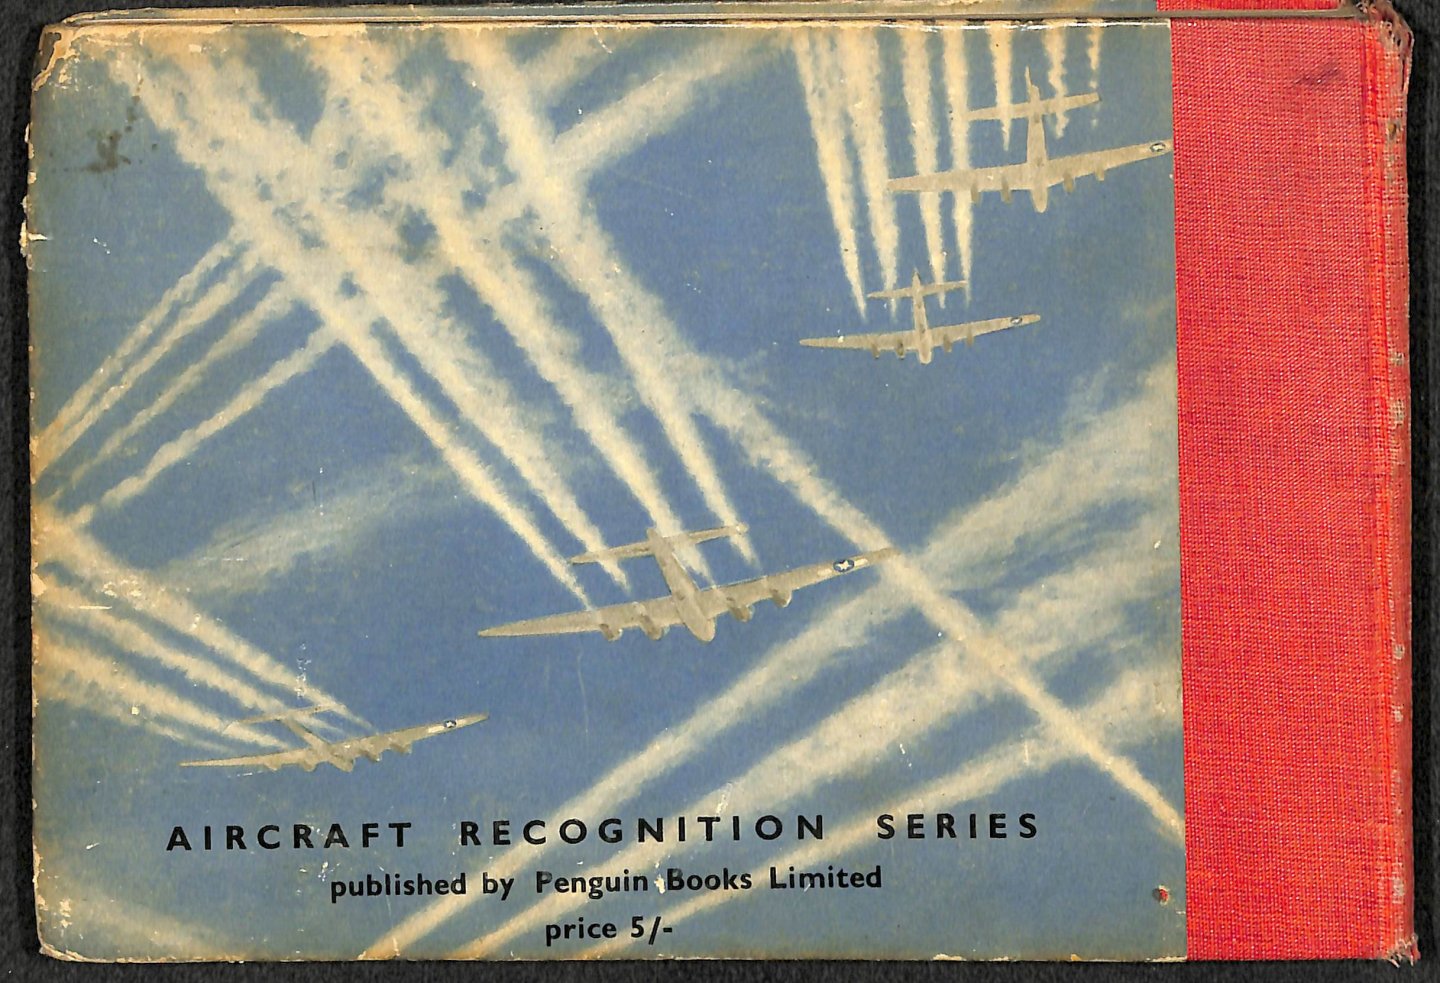 Saville-Sneath, R.A. - Aircraft of the United States Volume one.